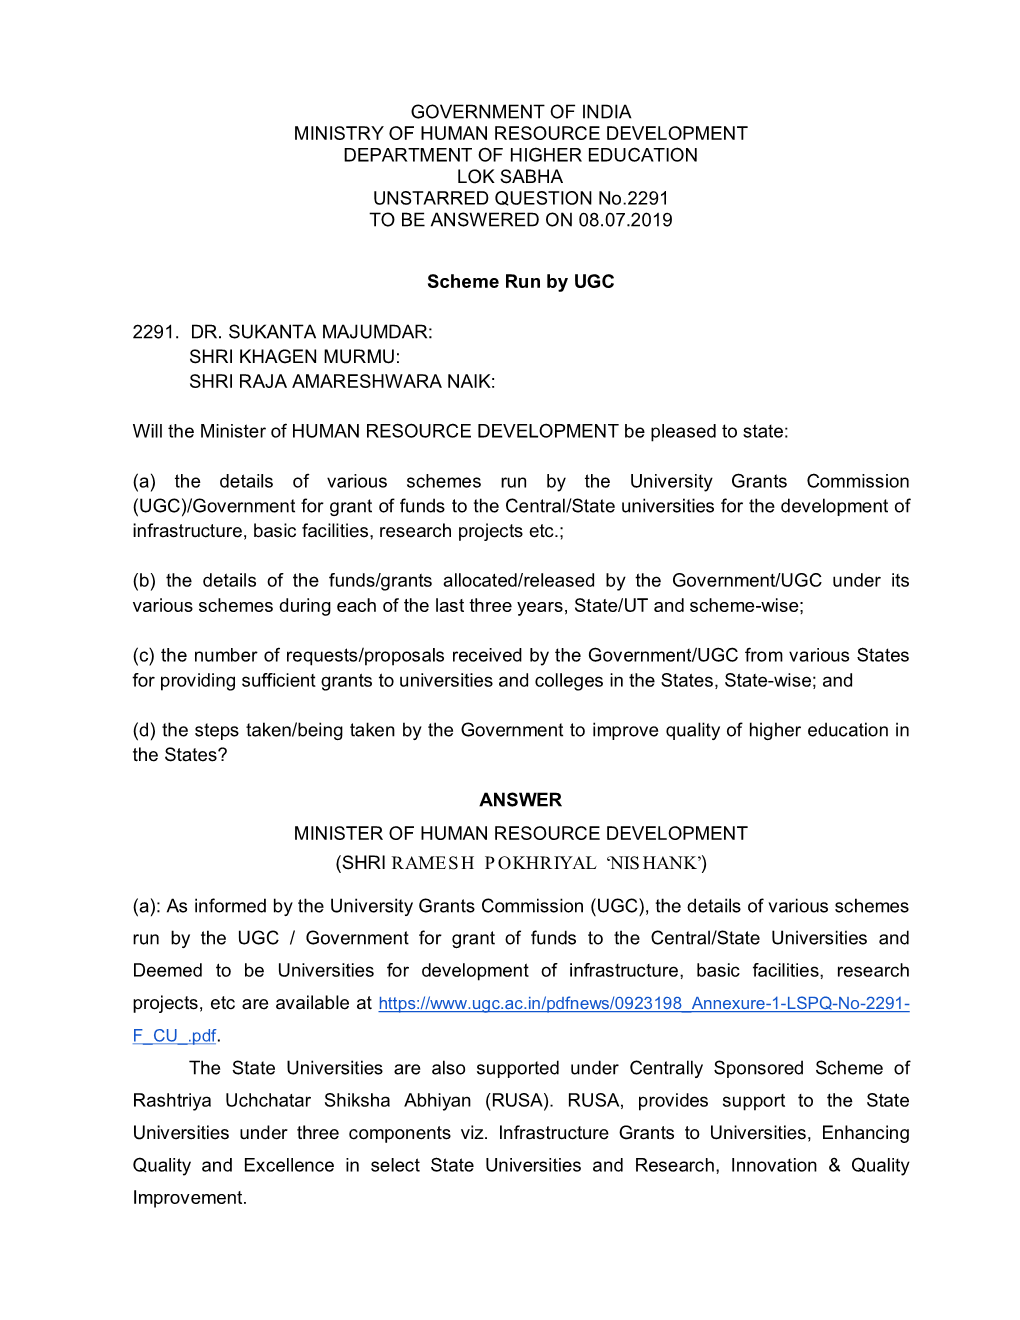 GOVERNMENT of INDIA MINISTRY of HUMAN RESOURCE DEVELOPMENT DEPARTMENT of HIGHER EDUCATION LOK SABHA UNSTARRED QUESTION No.2291 to BE ANSWERED on 08.07.2019